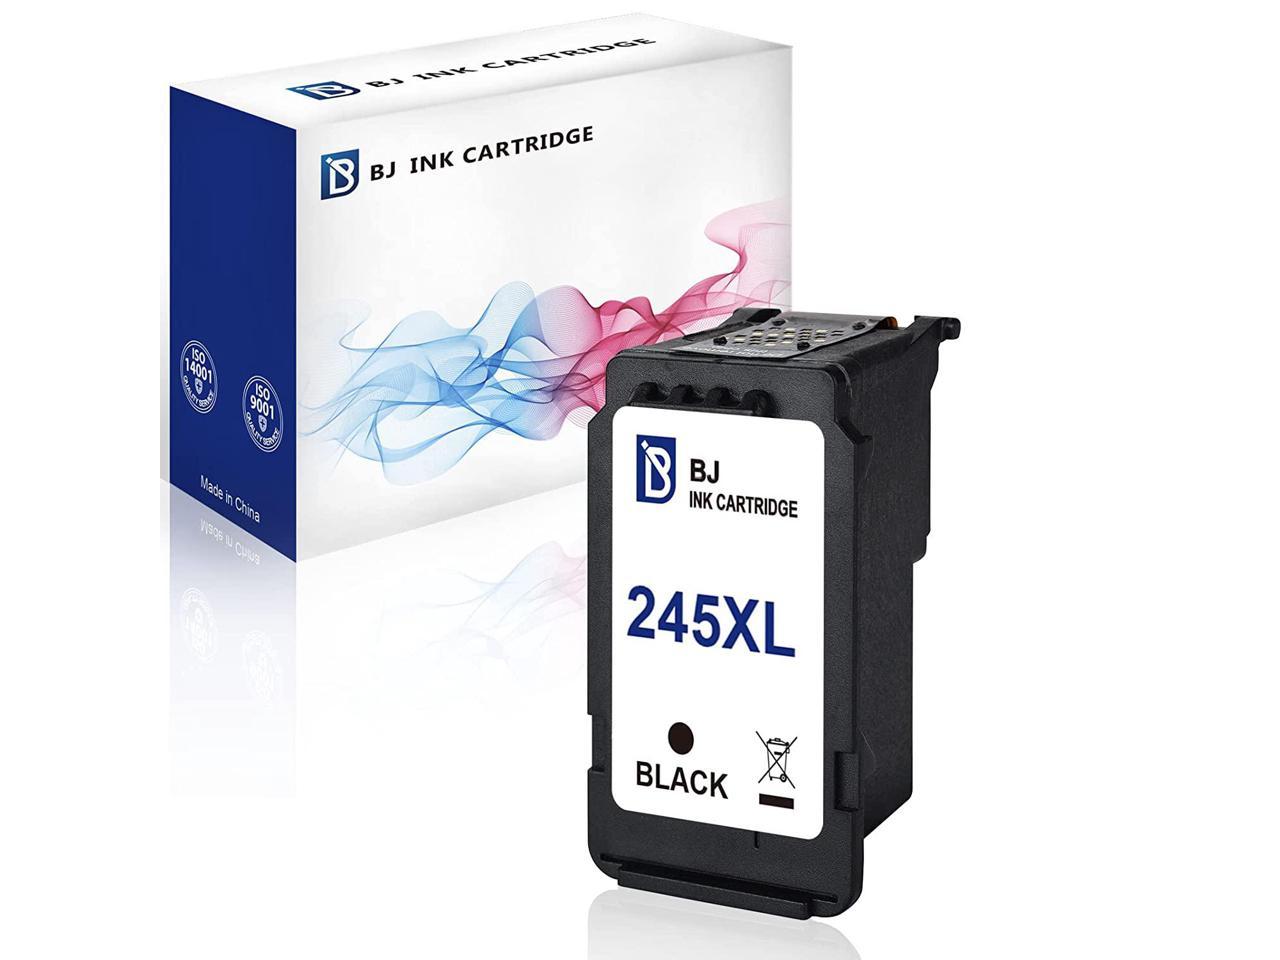 Gallop Remanufactured PG245XL PG-245XL Ink Cartridge Replacement for Canon PIXMA MX492 MX490 MG2420 MG2520 MG2522 MG2920 MG2922 MG3022 MG3029 iP2820 1 Black Show Accurate Ink Level